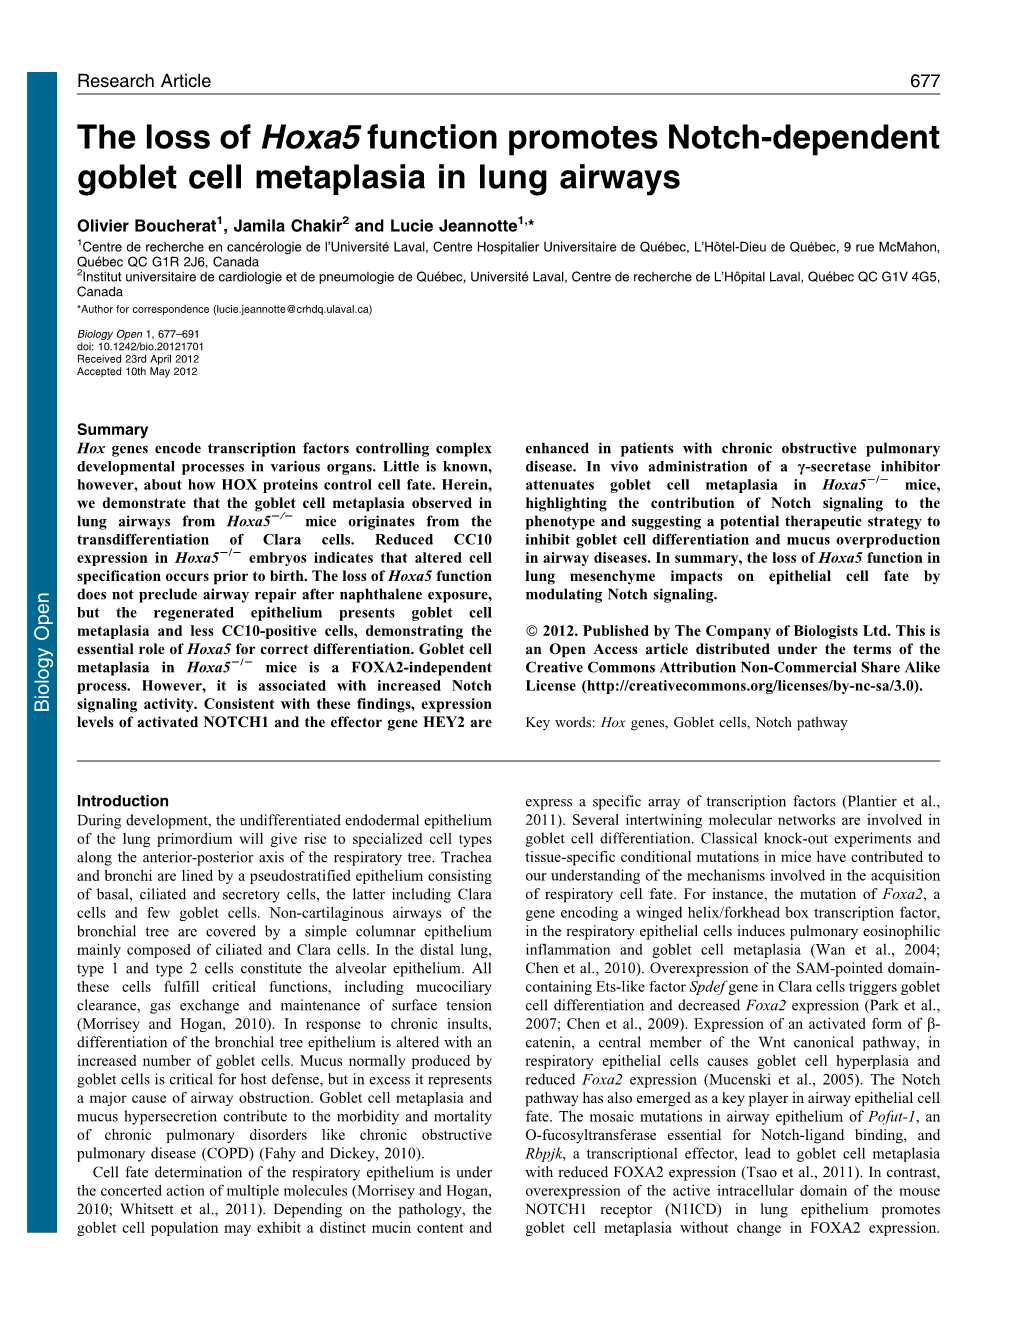 The Loss of Hoxa5 Function Promotes Notch-Dependent Goblet Cell Metaplasia in Lung Airways